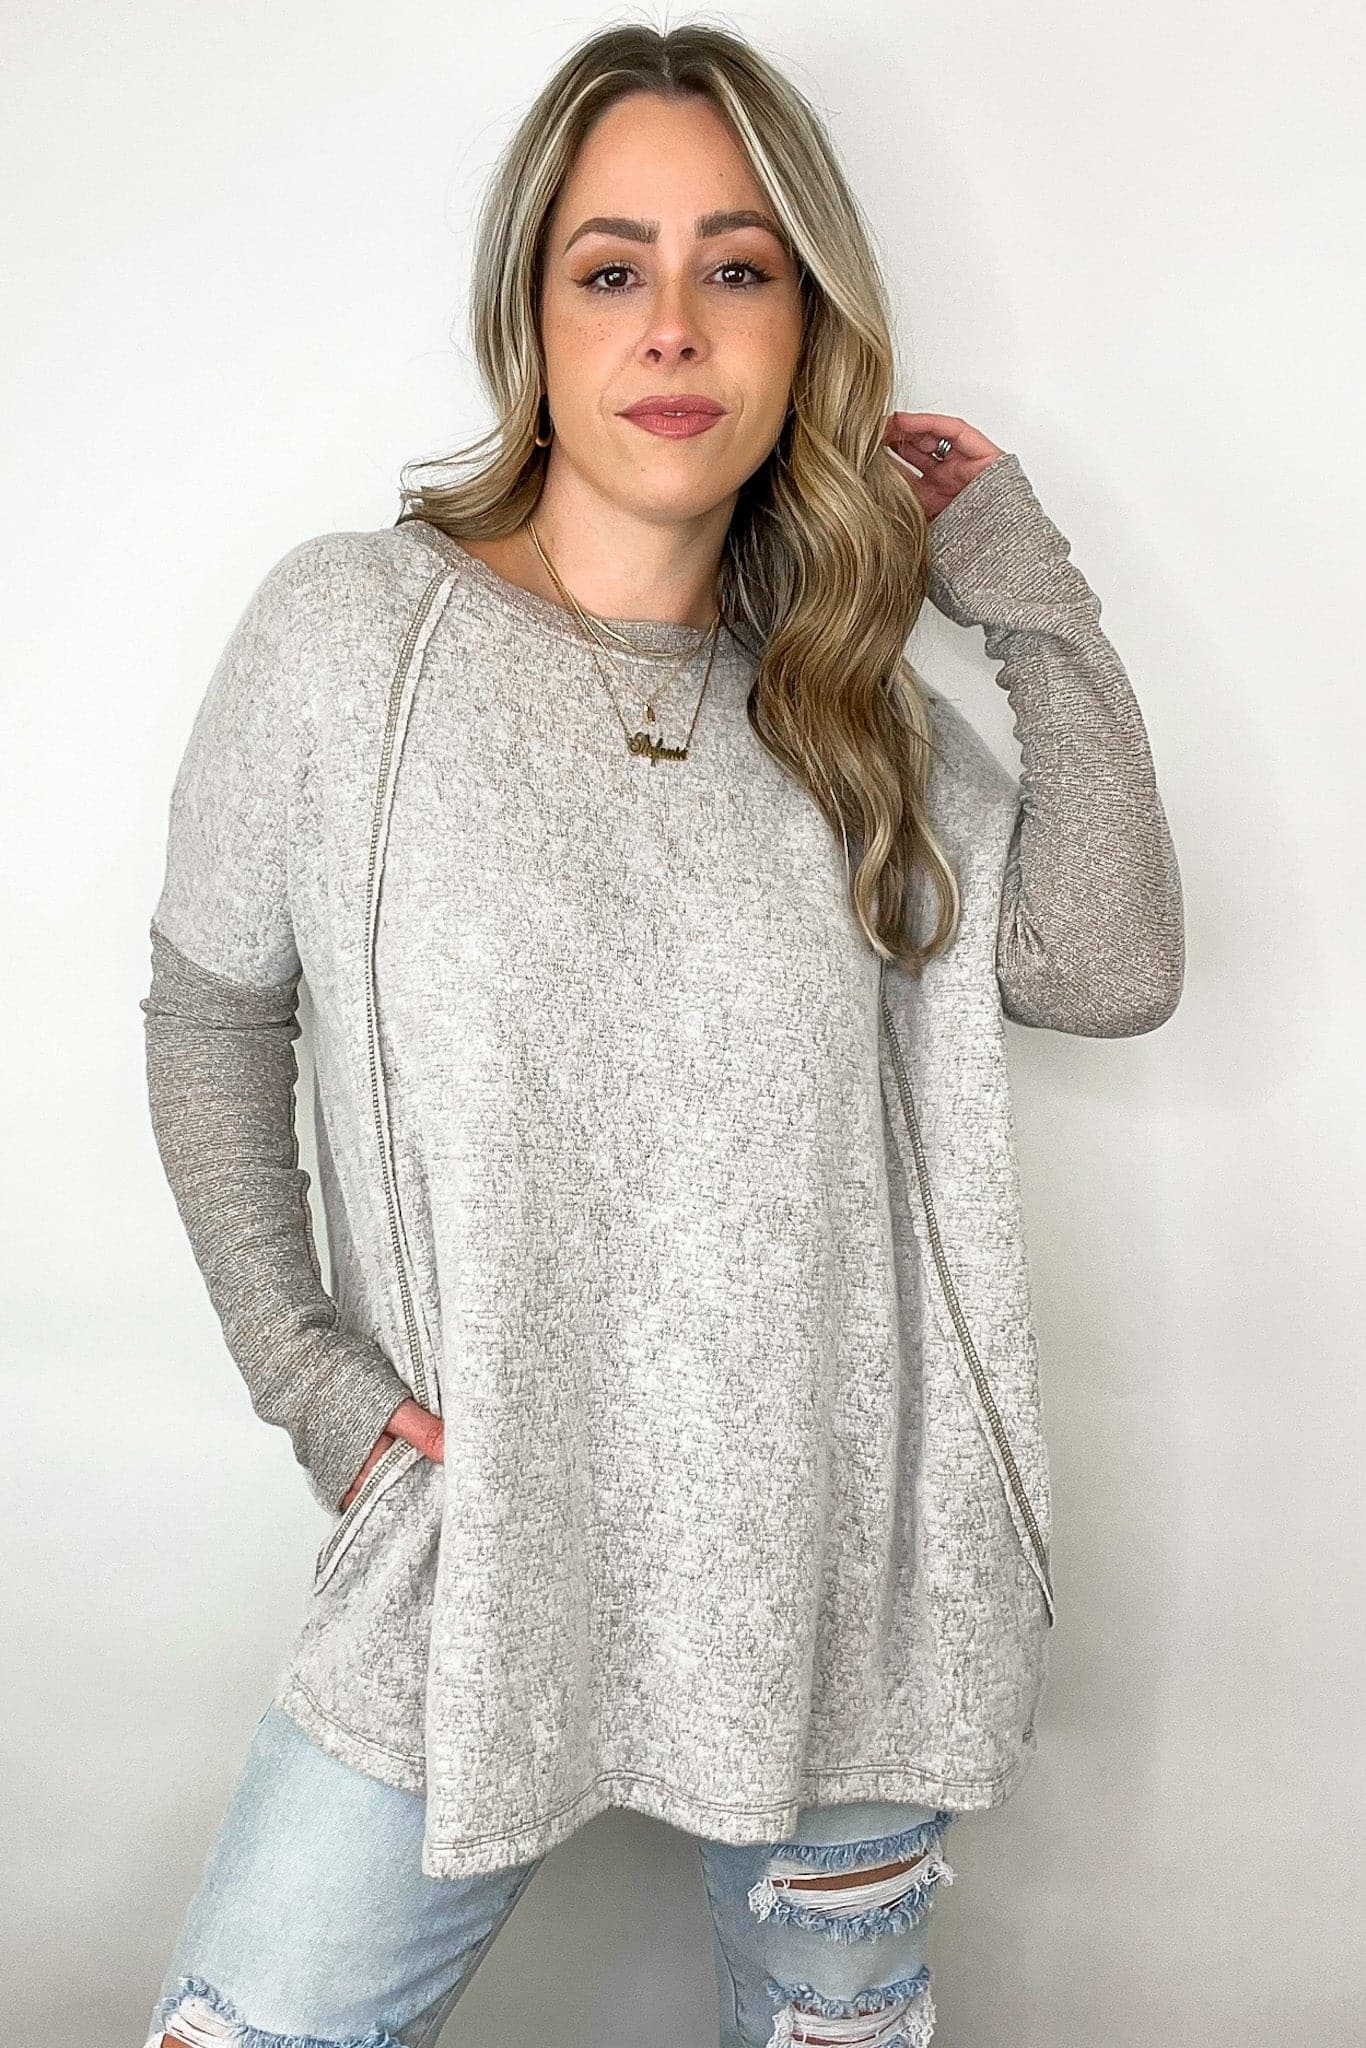  Amani Long Sleeve Contrast Top - FINAL SALE - Madison and Mallory